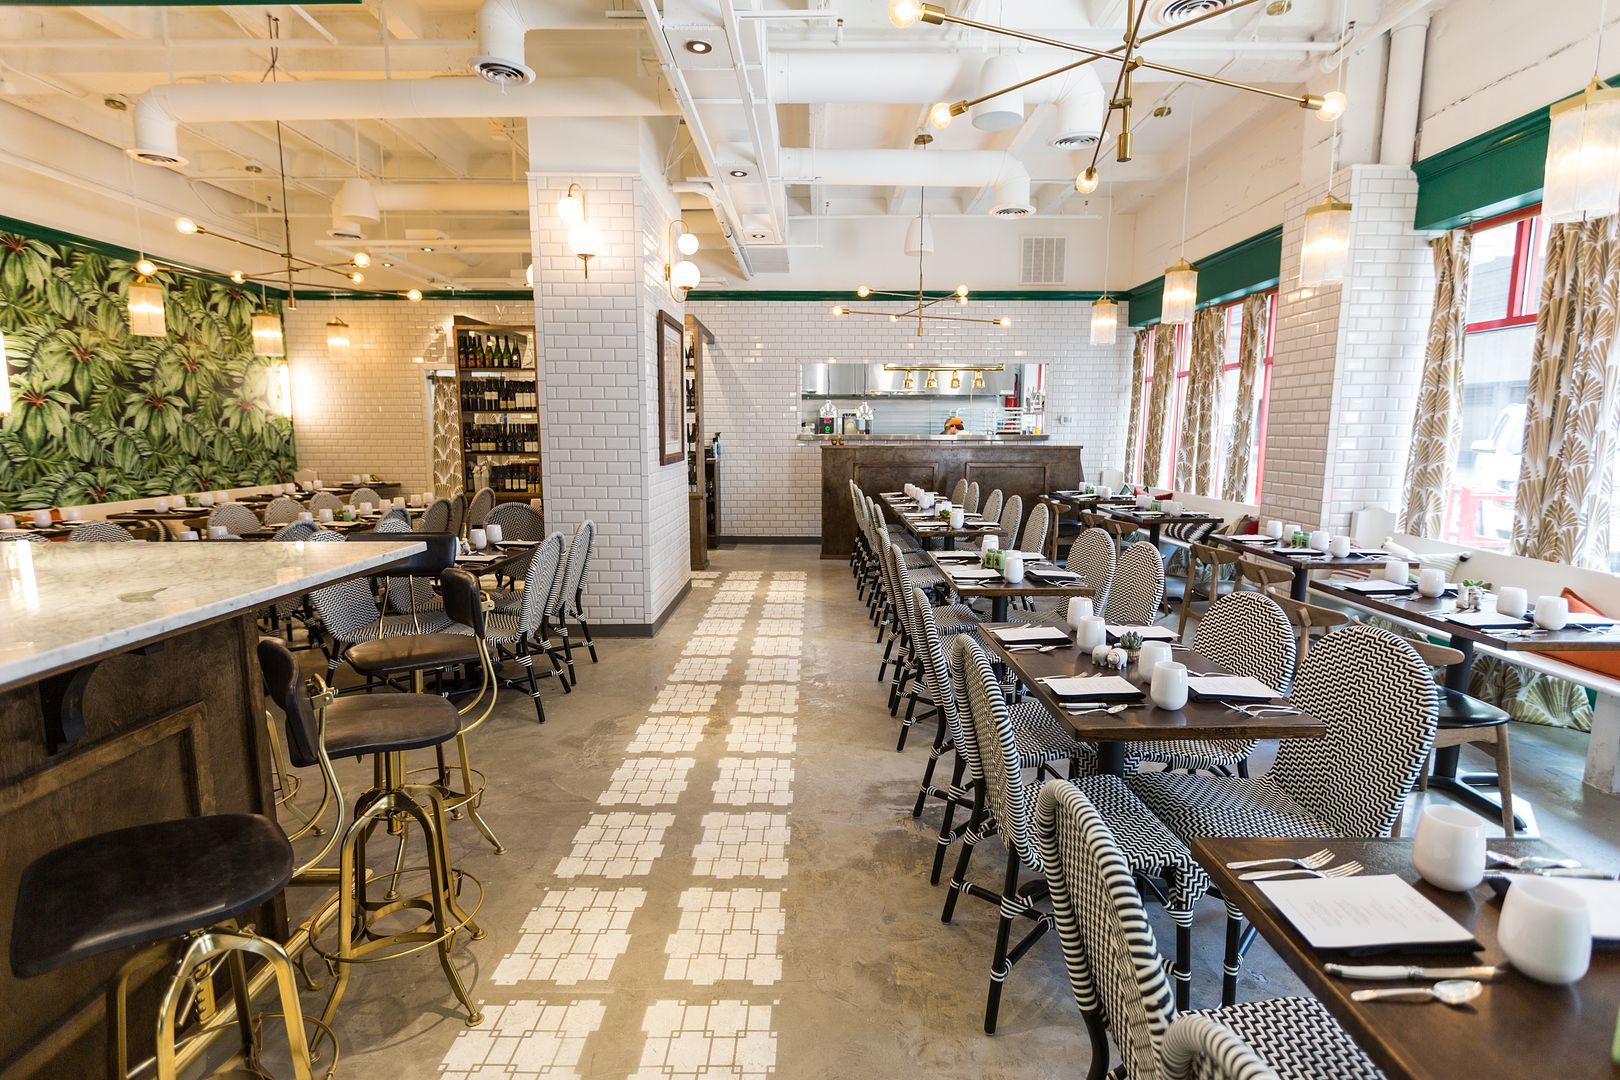 Perfectly Imperfect | Marsh Collective | Opal's Table Restaurant Design | Before & After